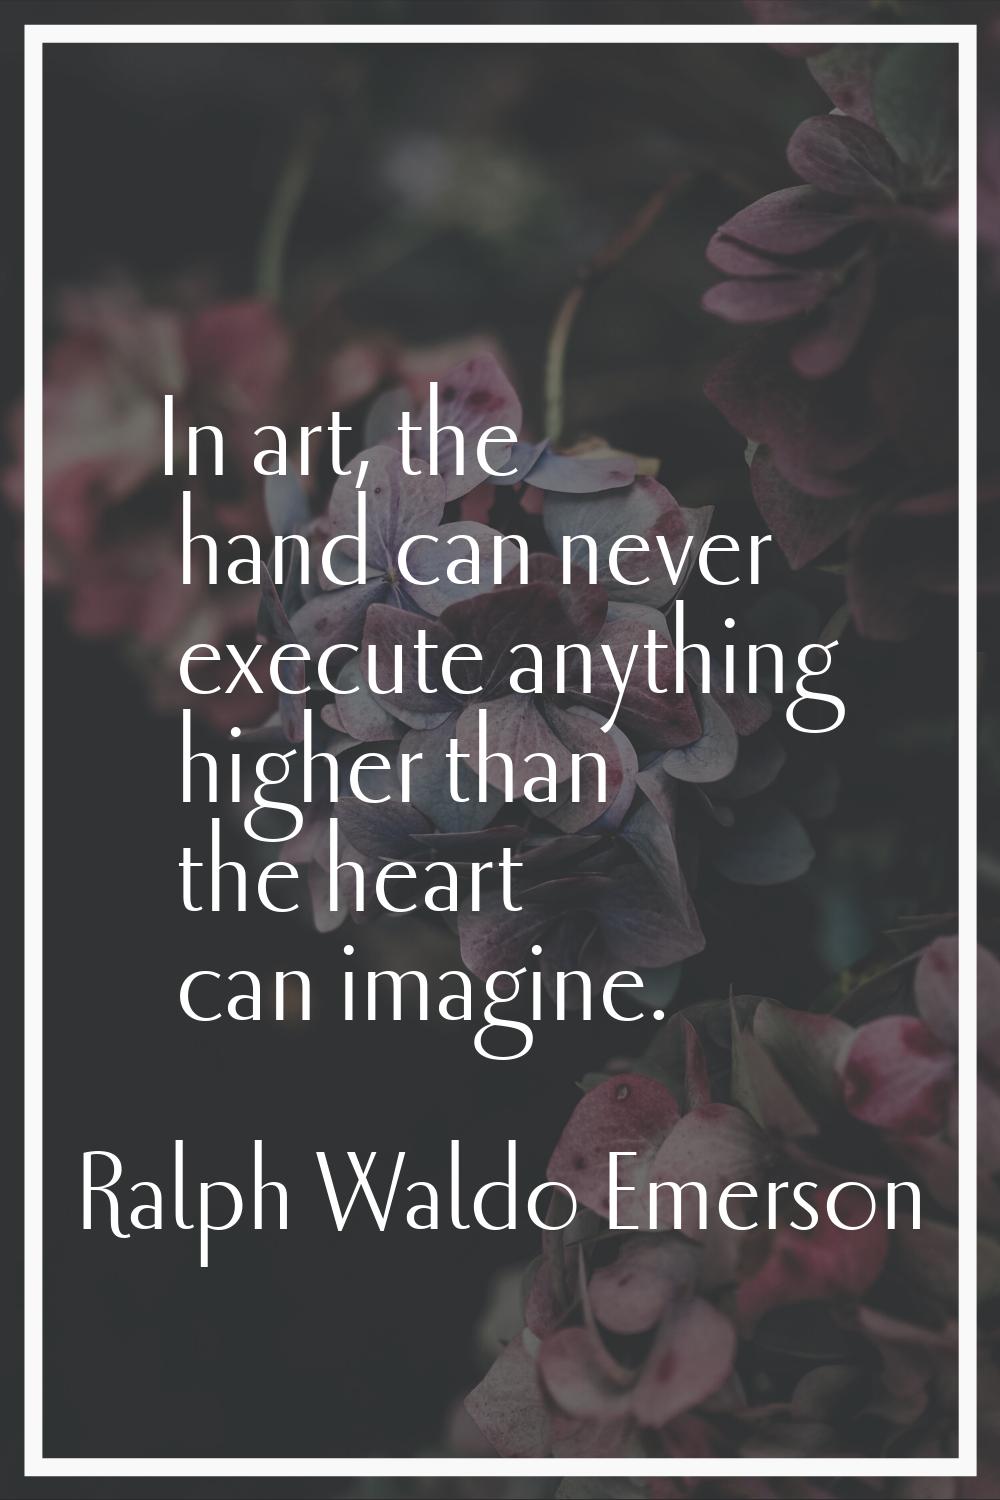 In art, the hand can never execute anything higher than the heart can imagine.